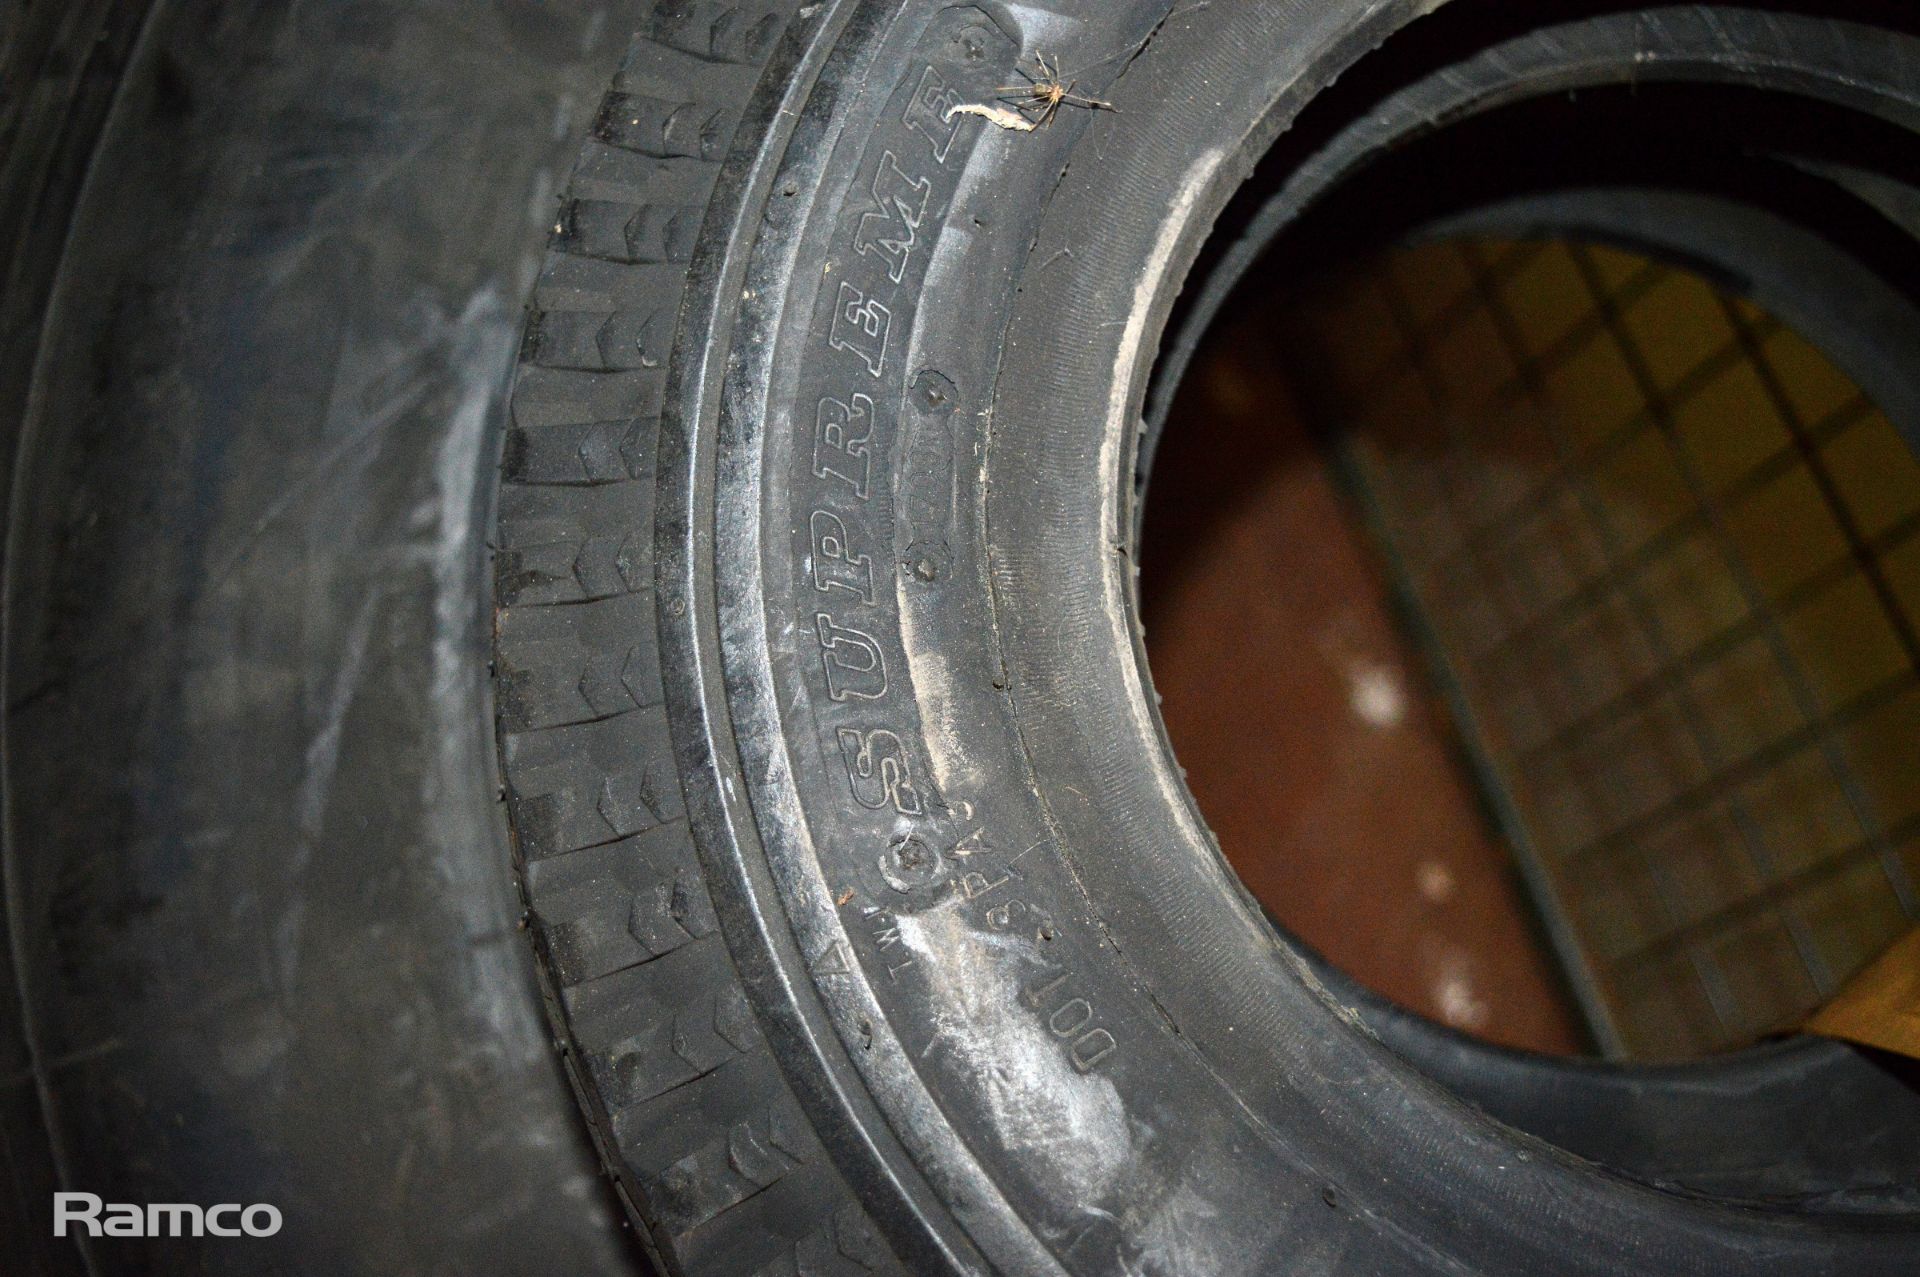 Vehicle and Trailer Tyres - 1x Michelin XZA 8.25R16 128K Tyre, 2x Supreme 4.80/4.00-8 Trailer Tyres - Image 3 of 3